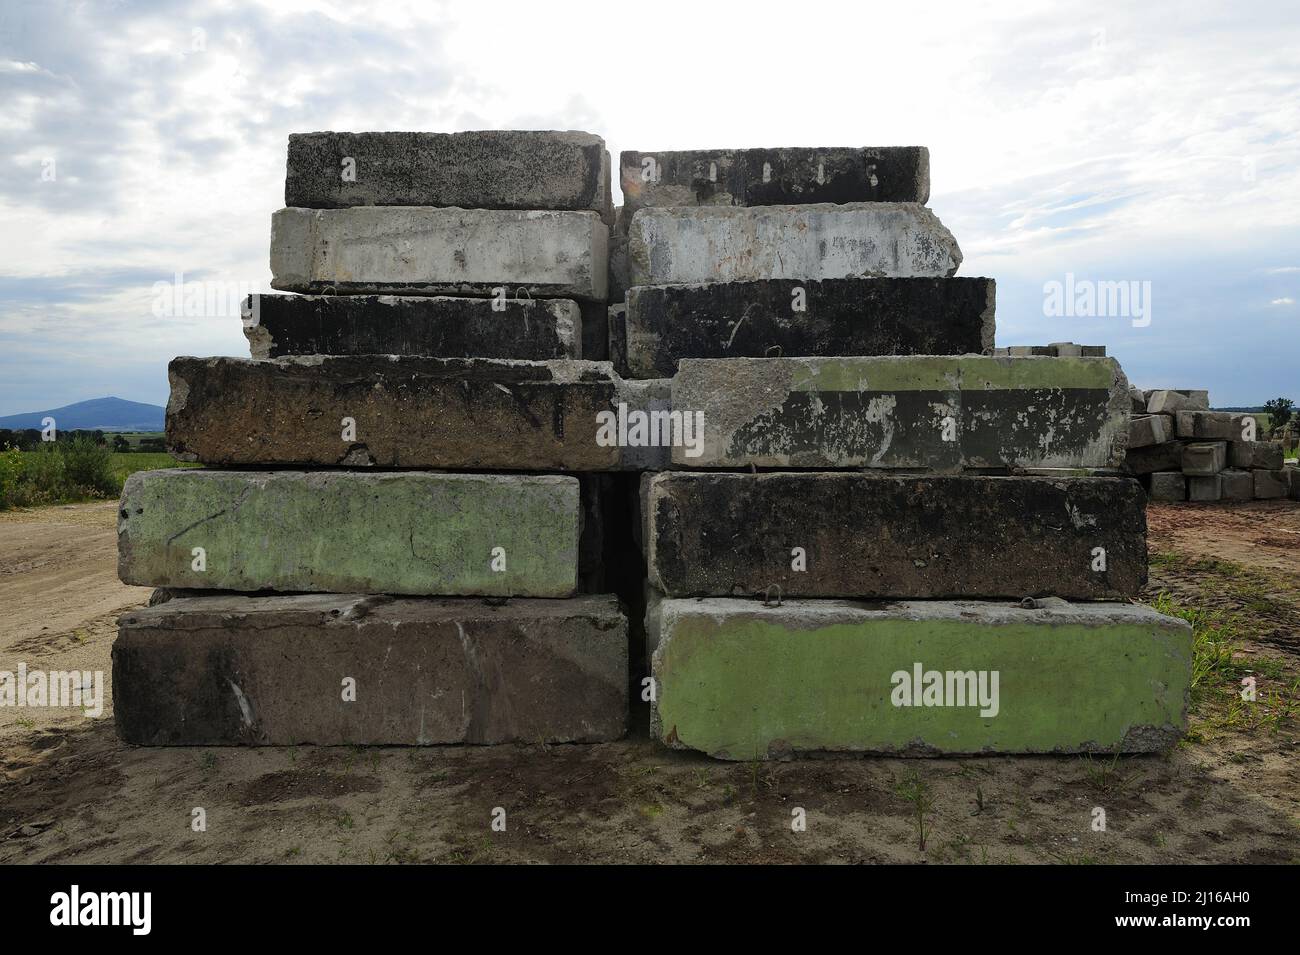 Concrete blocks, landscape, area hardening, investment, concrete slabs, old, raw material, used, Stock Photo